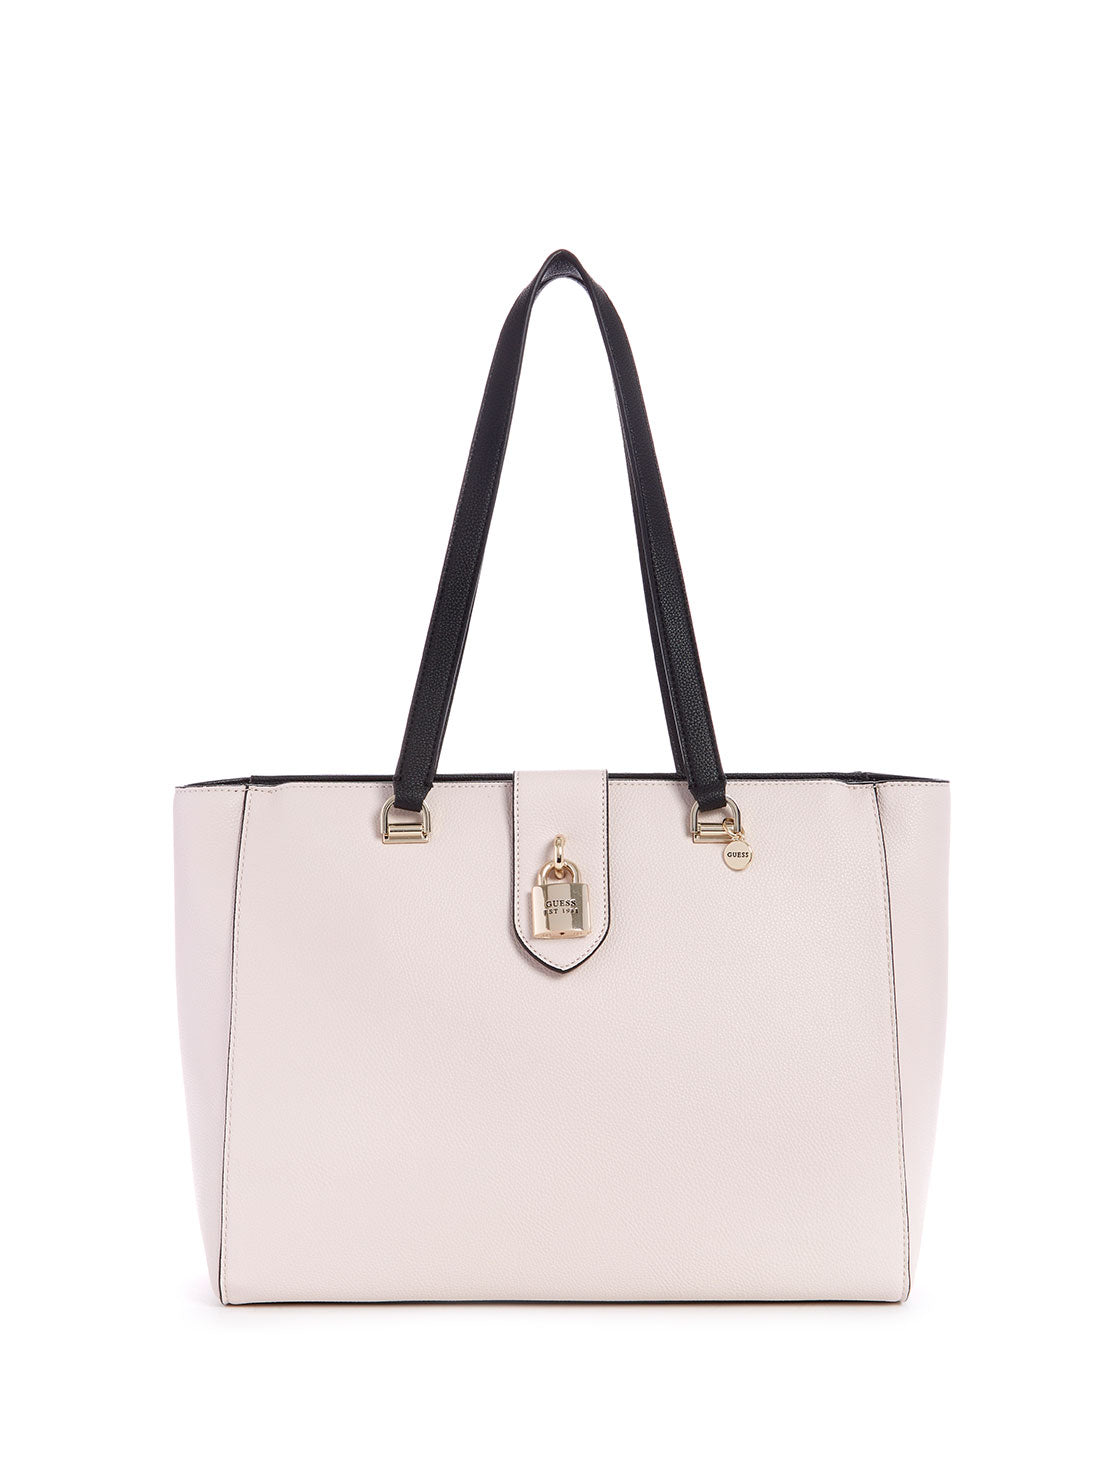 GUESS Women's Stone Jardine Elite Tote Bag VG838623 Front View